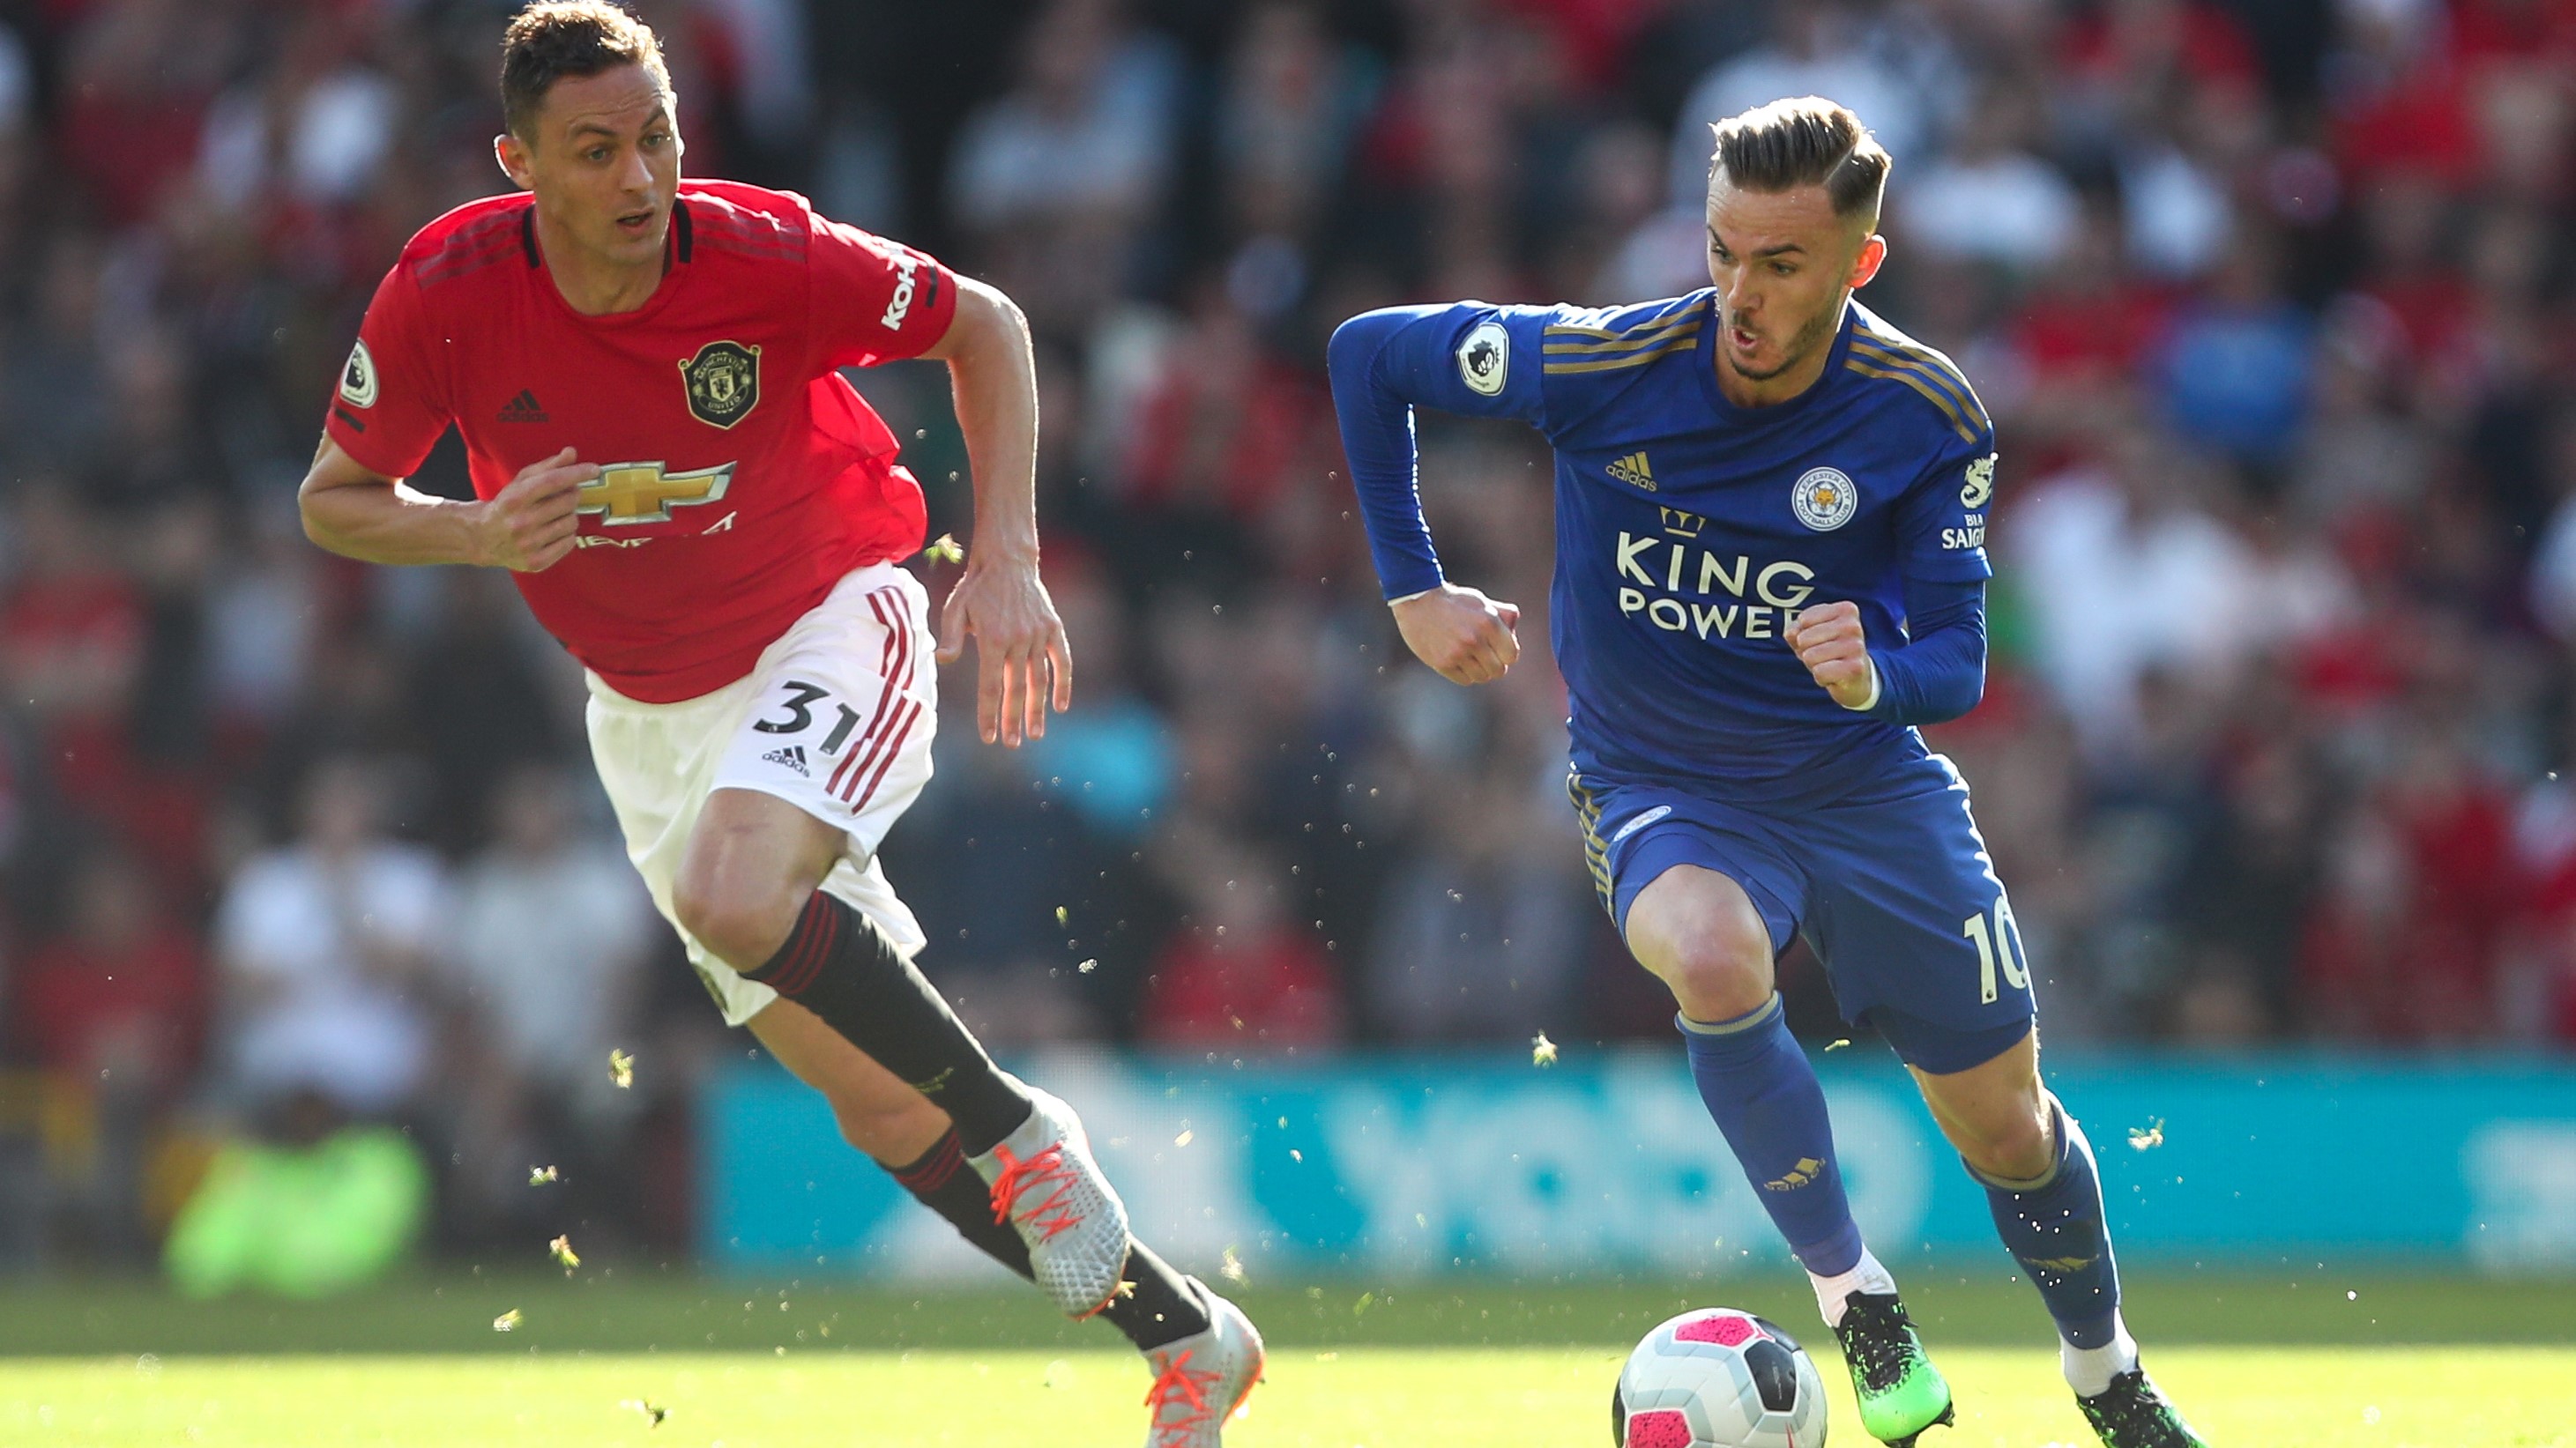 Is the Premier League pushing fans into illegal streaming? TechRadar